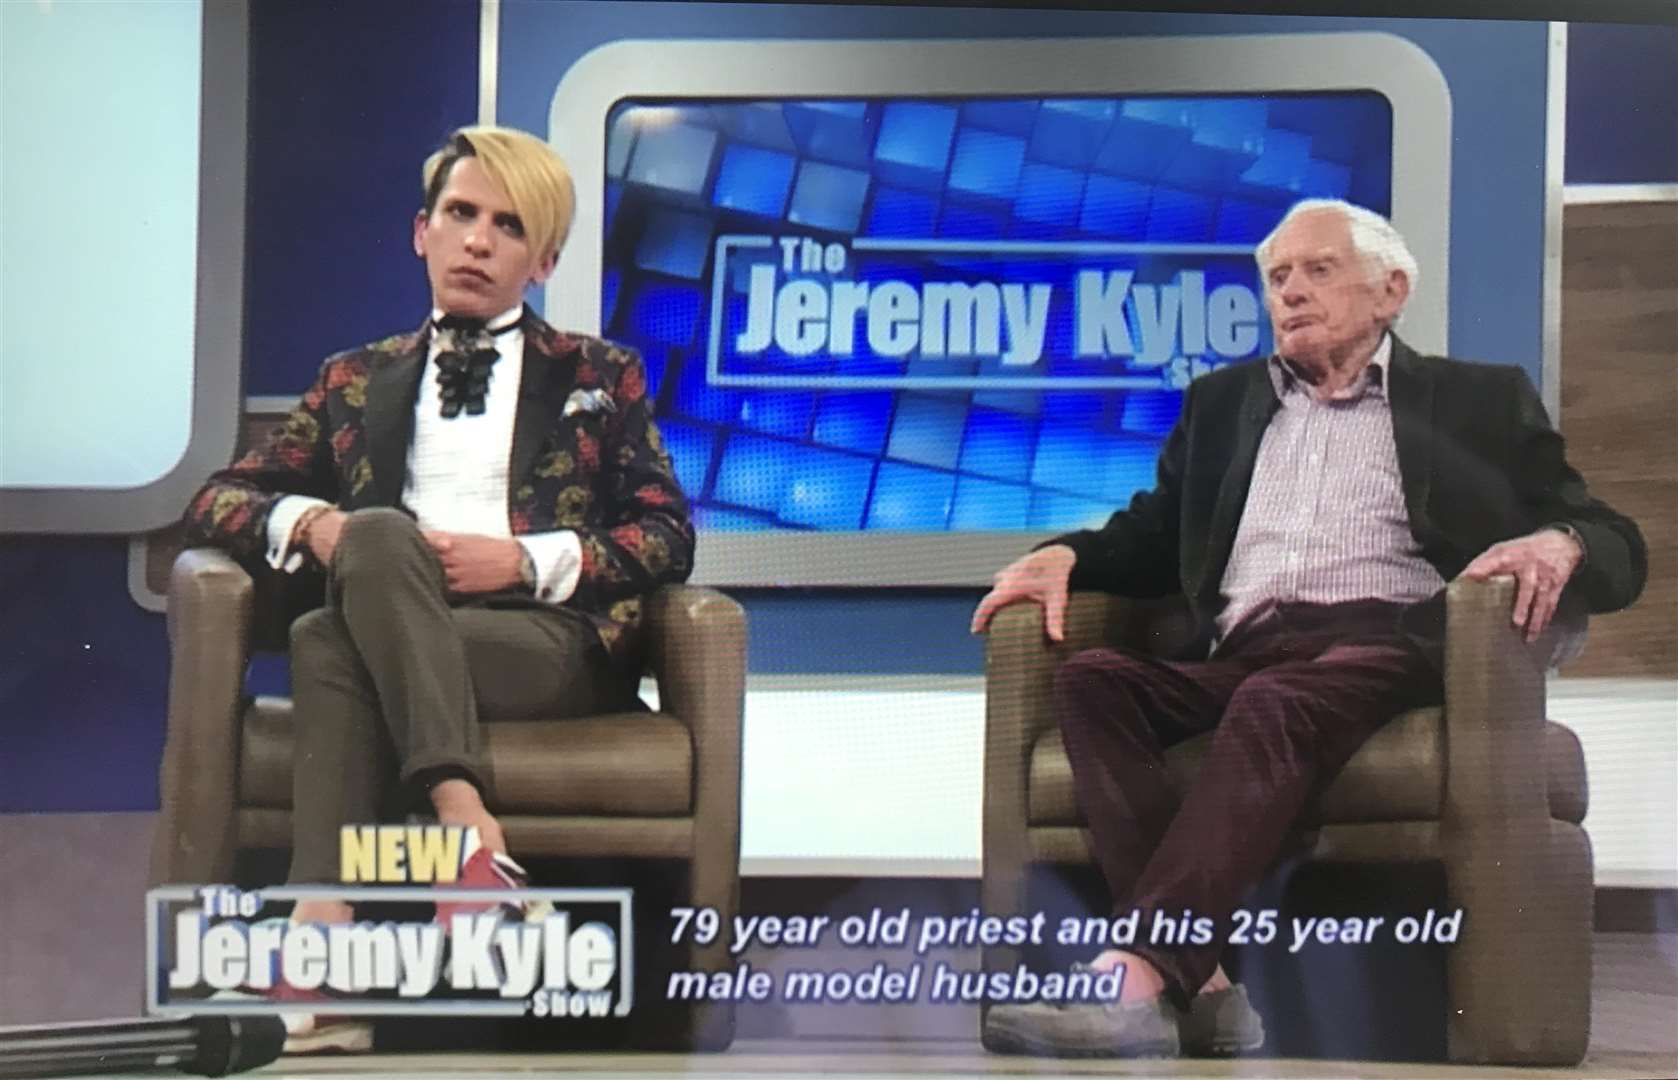 Jeremy Kyle has advised the pair to spend more time together (2777704)